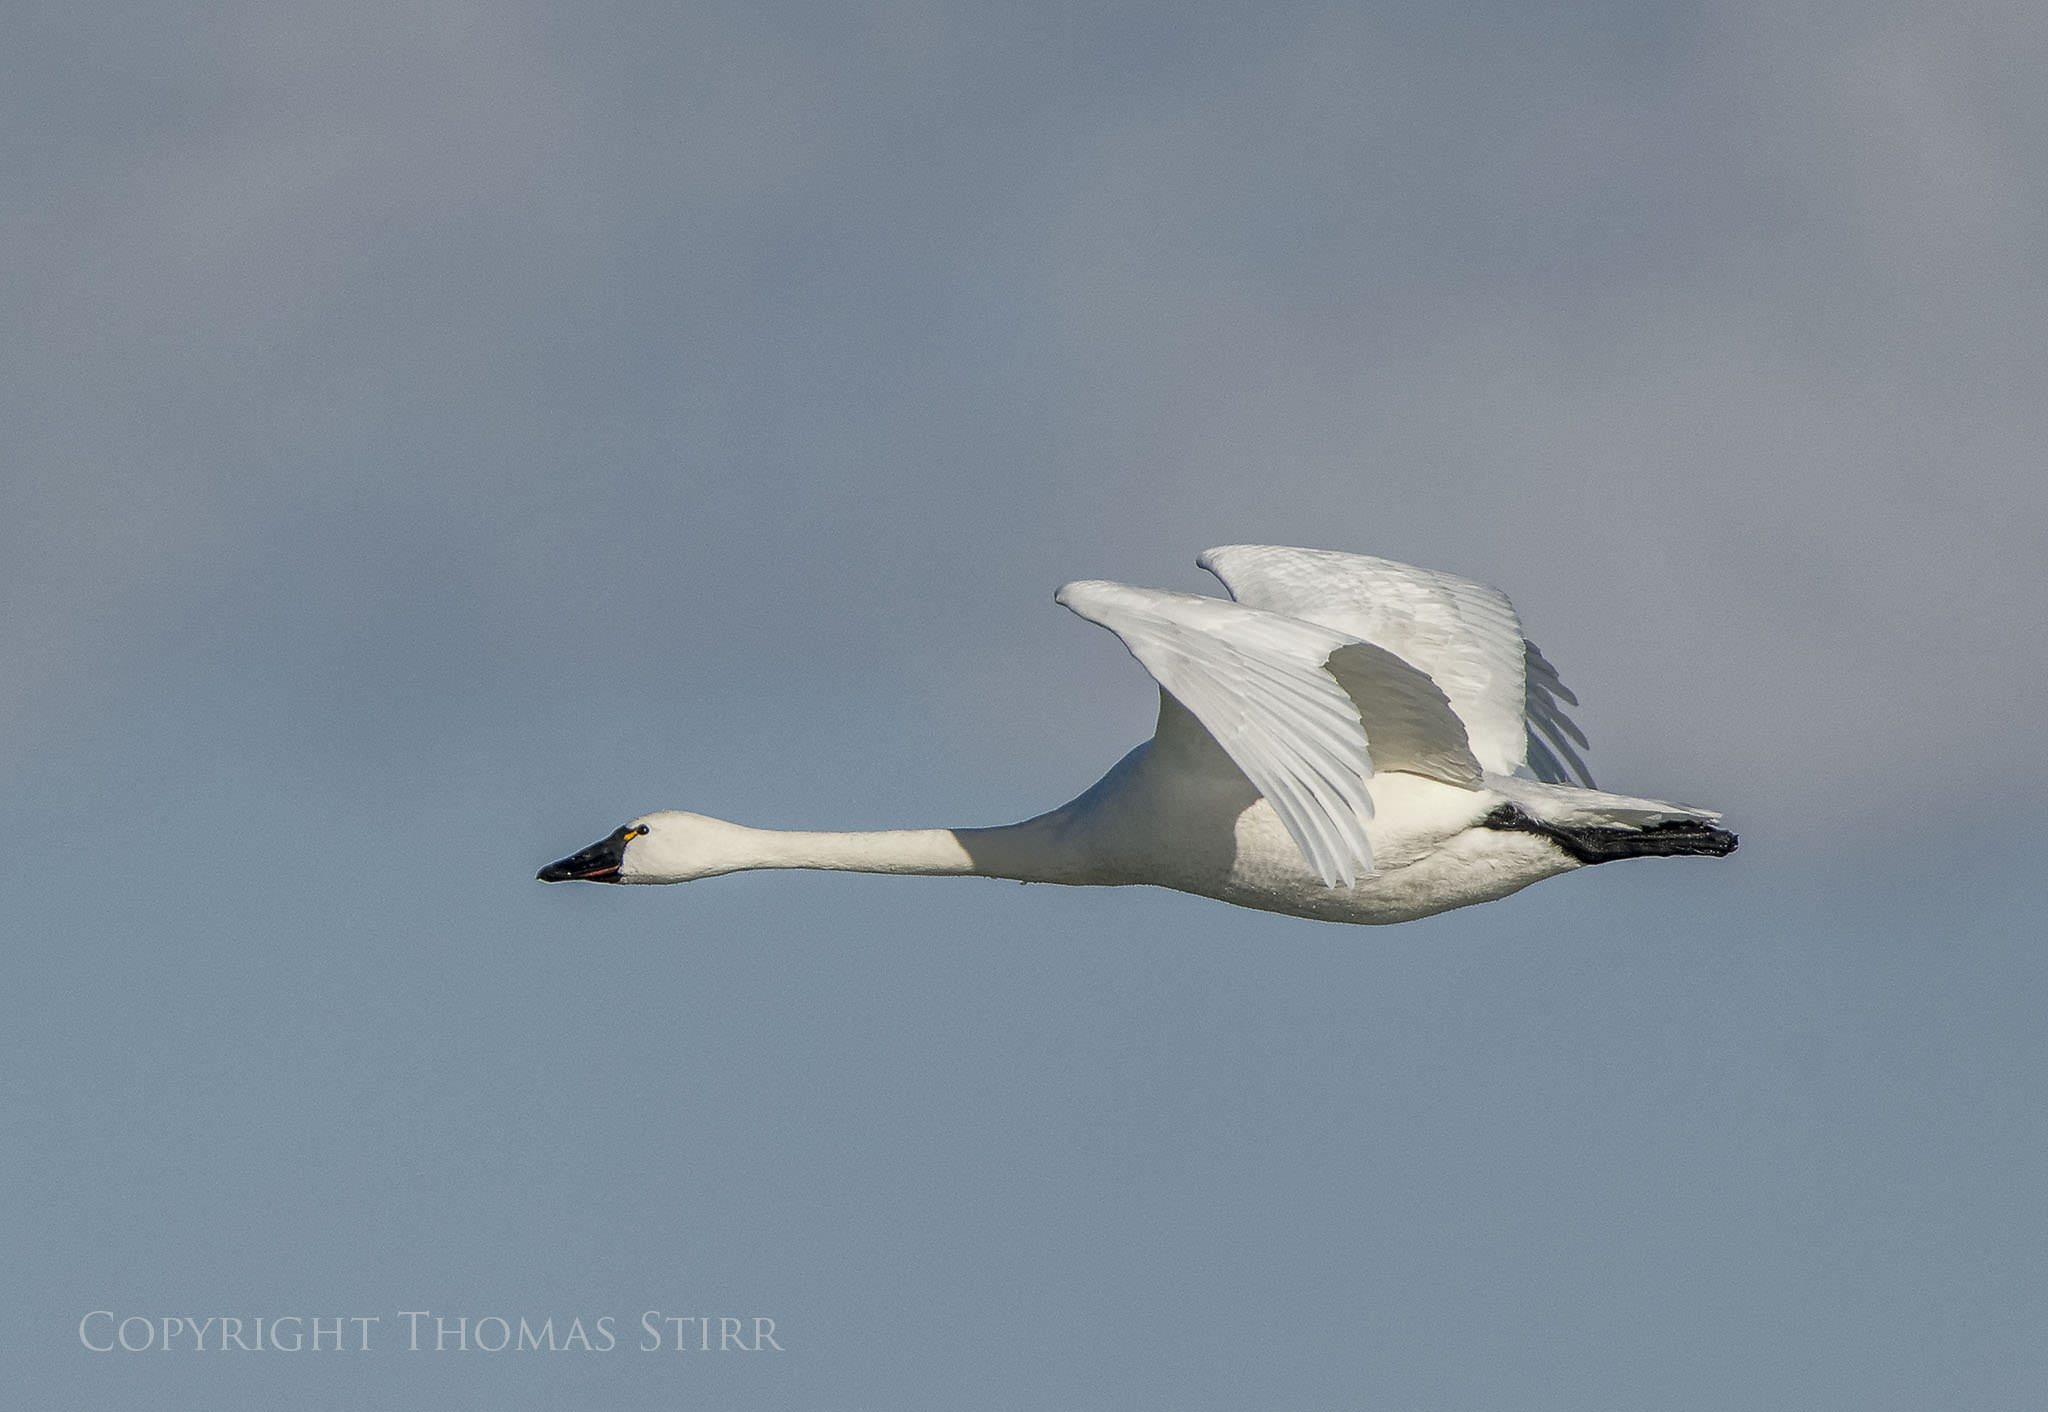 Photographing Tundra Swans with Tamron 150-600mm - Photography Life